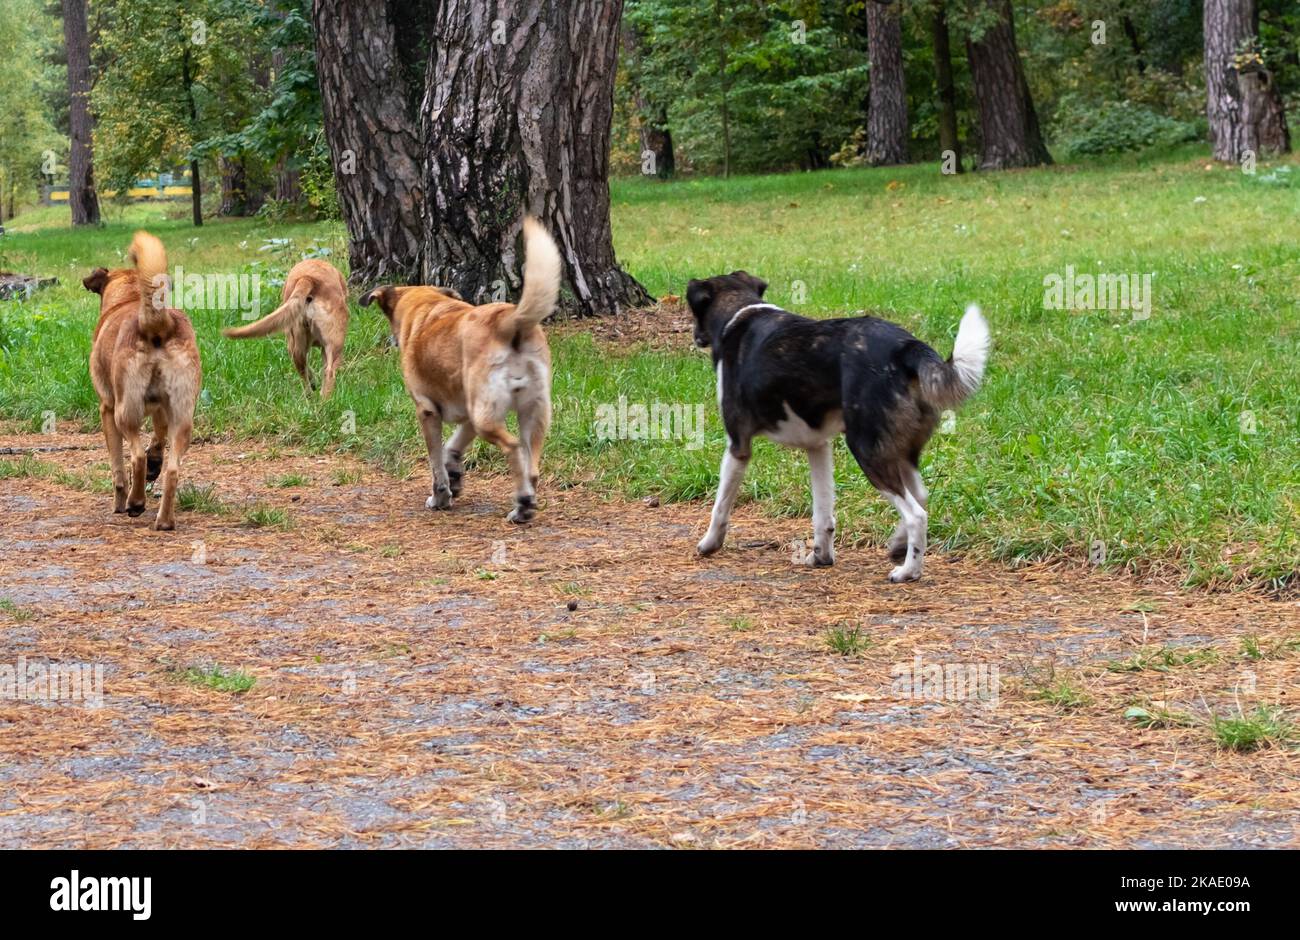 Large homeless stray dogs in the park area Stock Photo